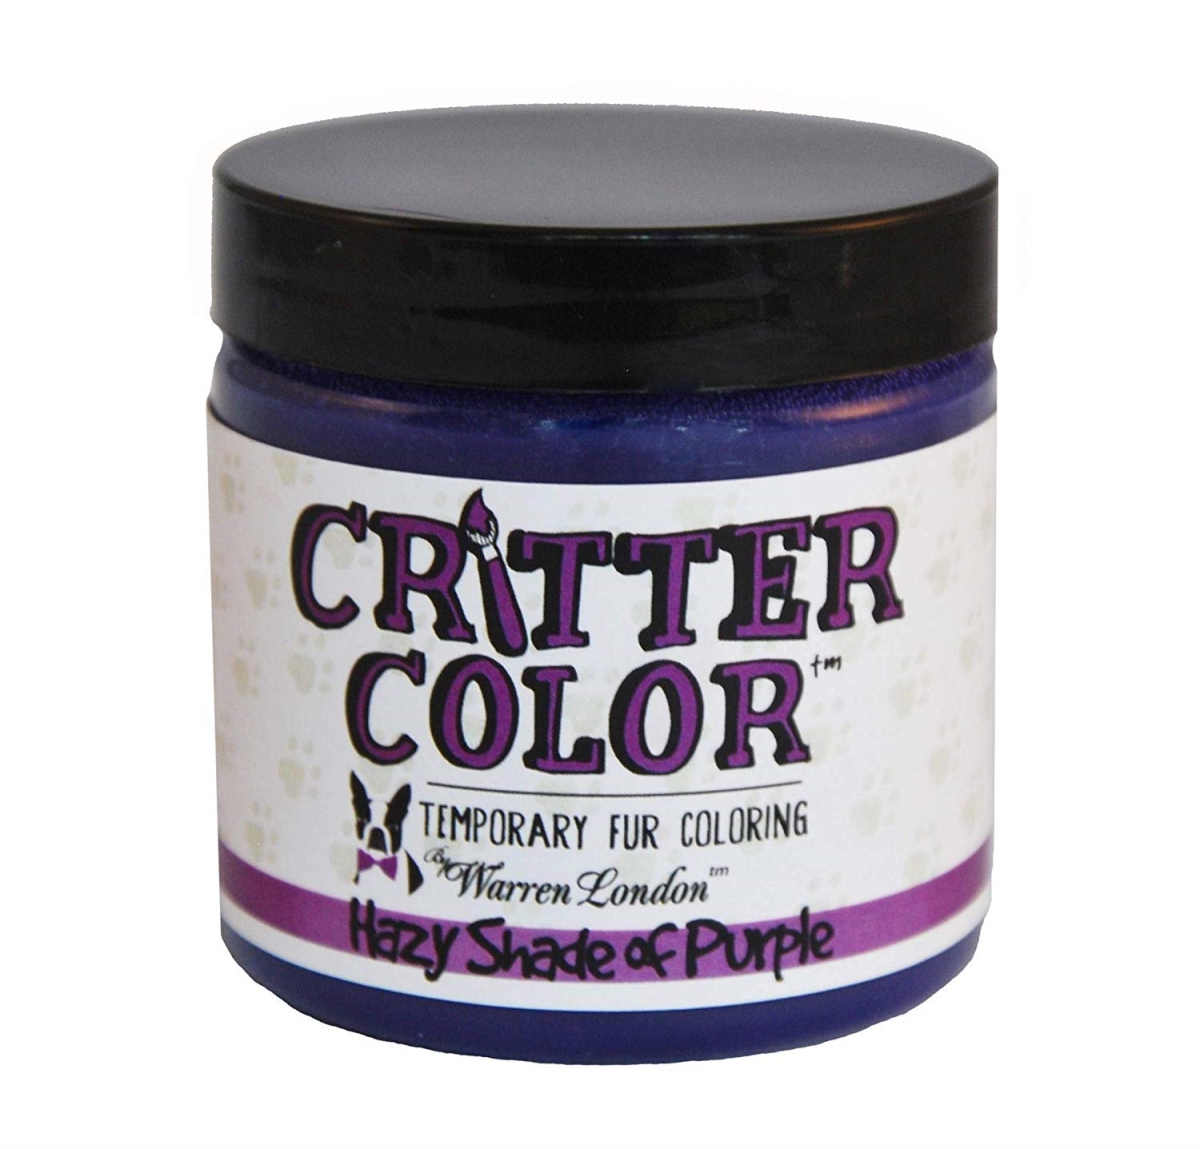 101805 Critter Color Temporary Fur Coloring For Dogs - Hazy Shade Of Purple